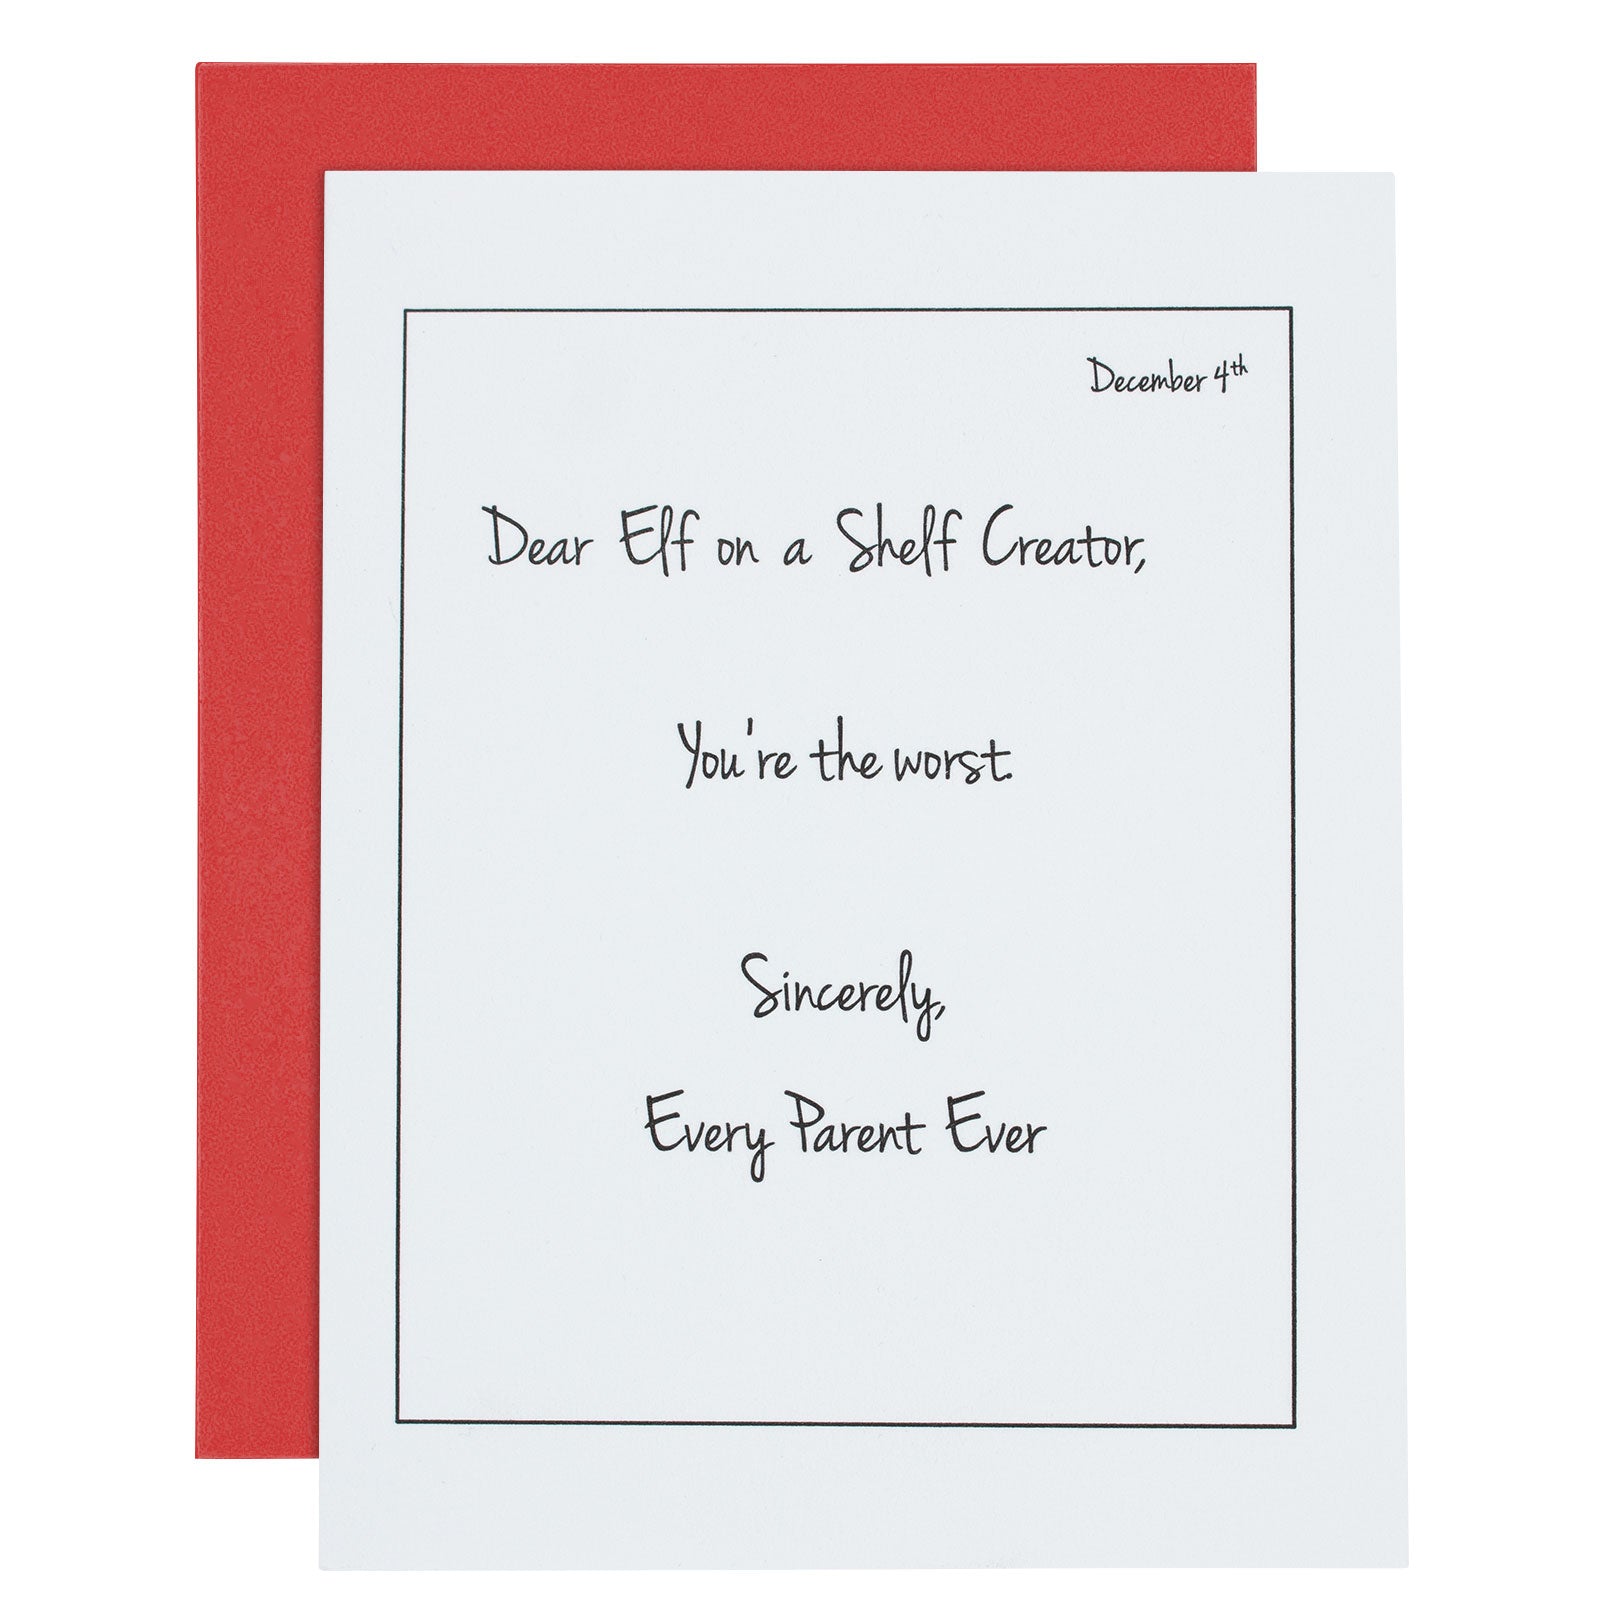 Dear Elf on a Shelf Creator, You're the worst. Sincerely, Every Parent Ever - Letterpress Card